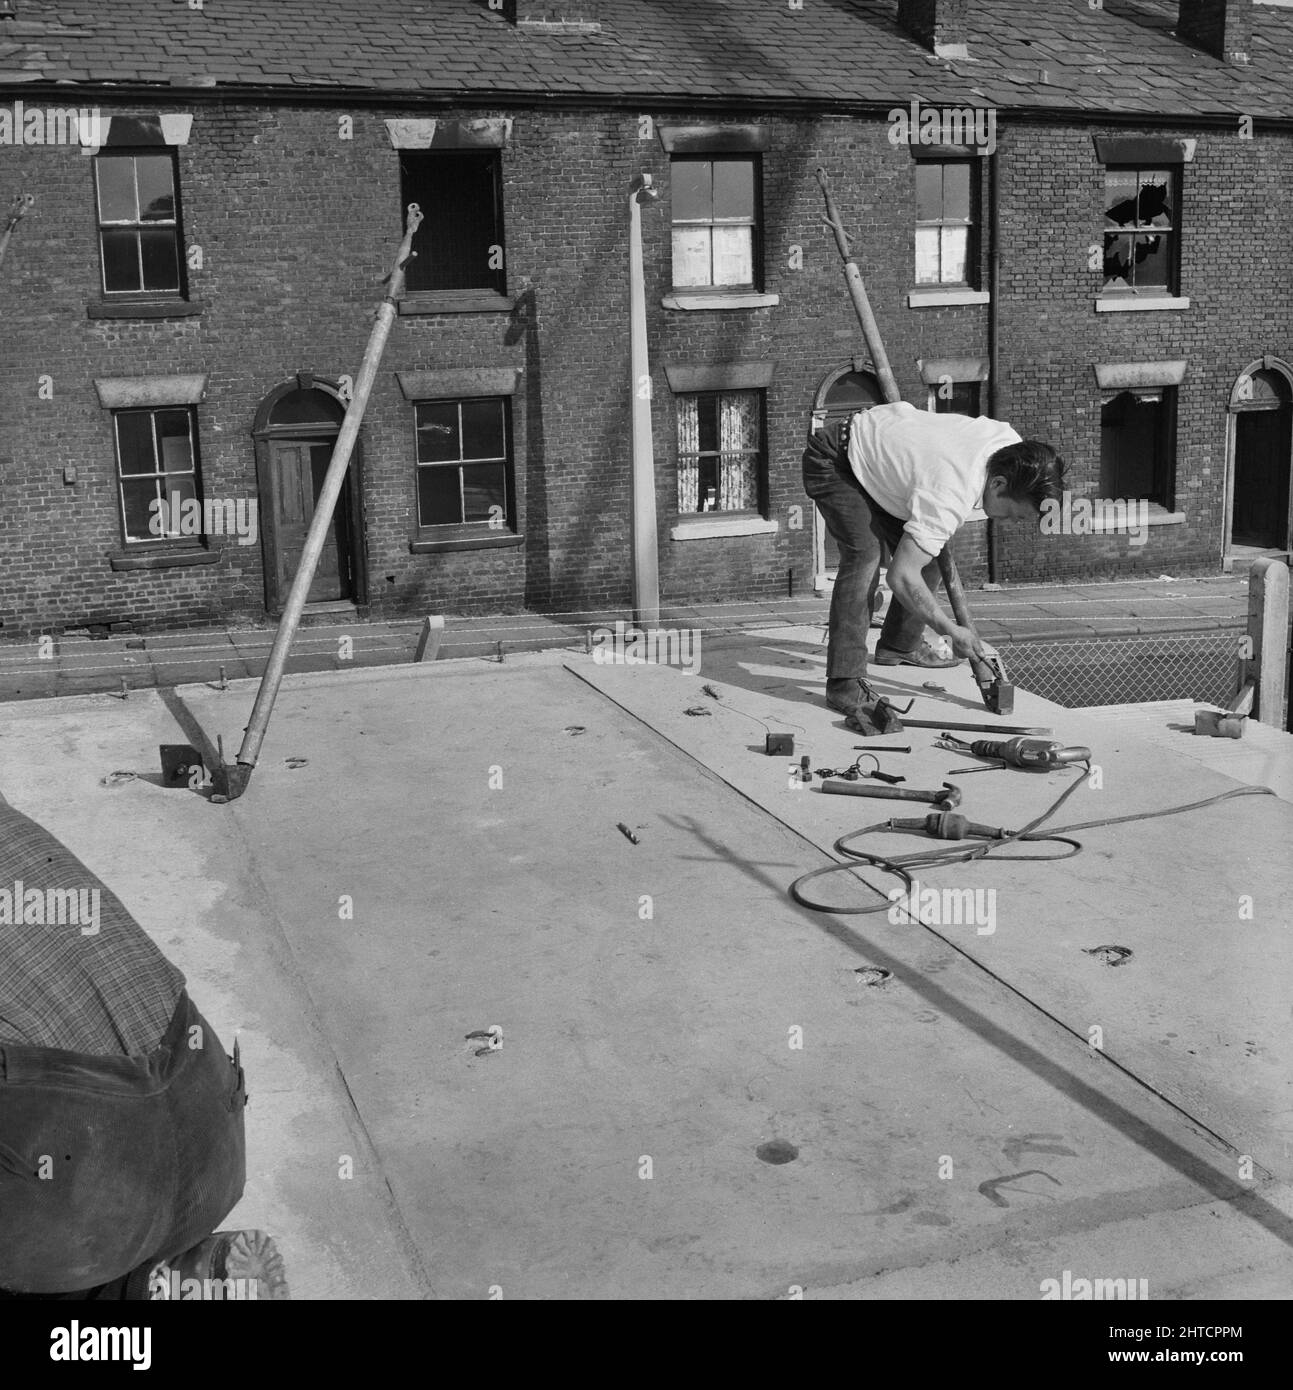 St Mary's Estate, Oldham, 01/09/1964. A worker securing a concrete slab during the construction of 12M Jespersen prototype flats in Oldham, with derelict terraced houses in the background. In 1963, John Laing and Son Ltd bought the rights to the Danish industrialised building system known as Jespersen (sometimes referred to as Jesperson). The company built factories in Scotland, Hampshire and Lancashire producing Jespersen prefabricated parts and precast concrete panels, allowing the building of housing to be rationalised, saving time and money. The prototype flats shown in the photograph were Stock Photo